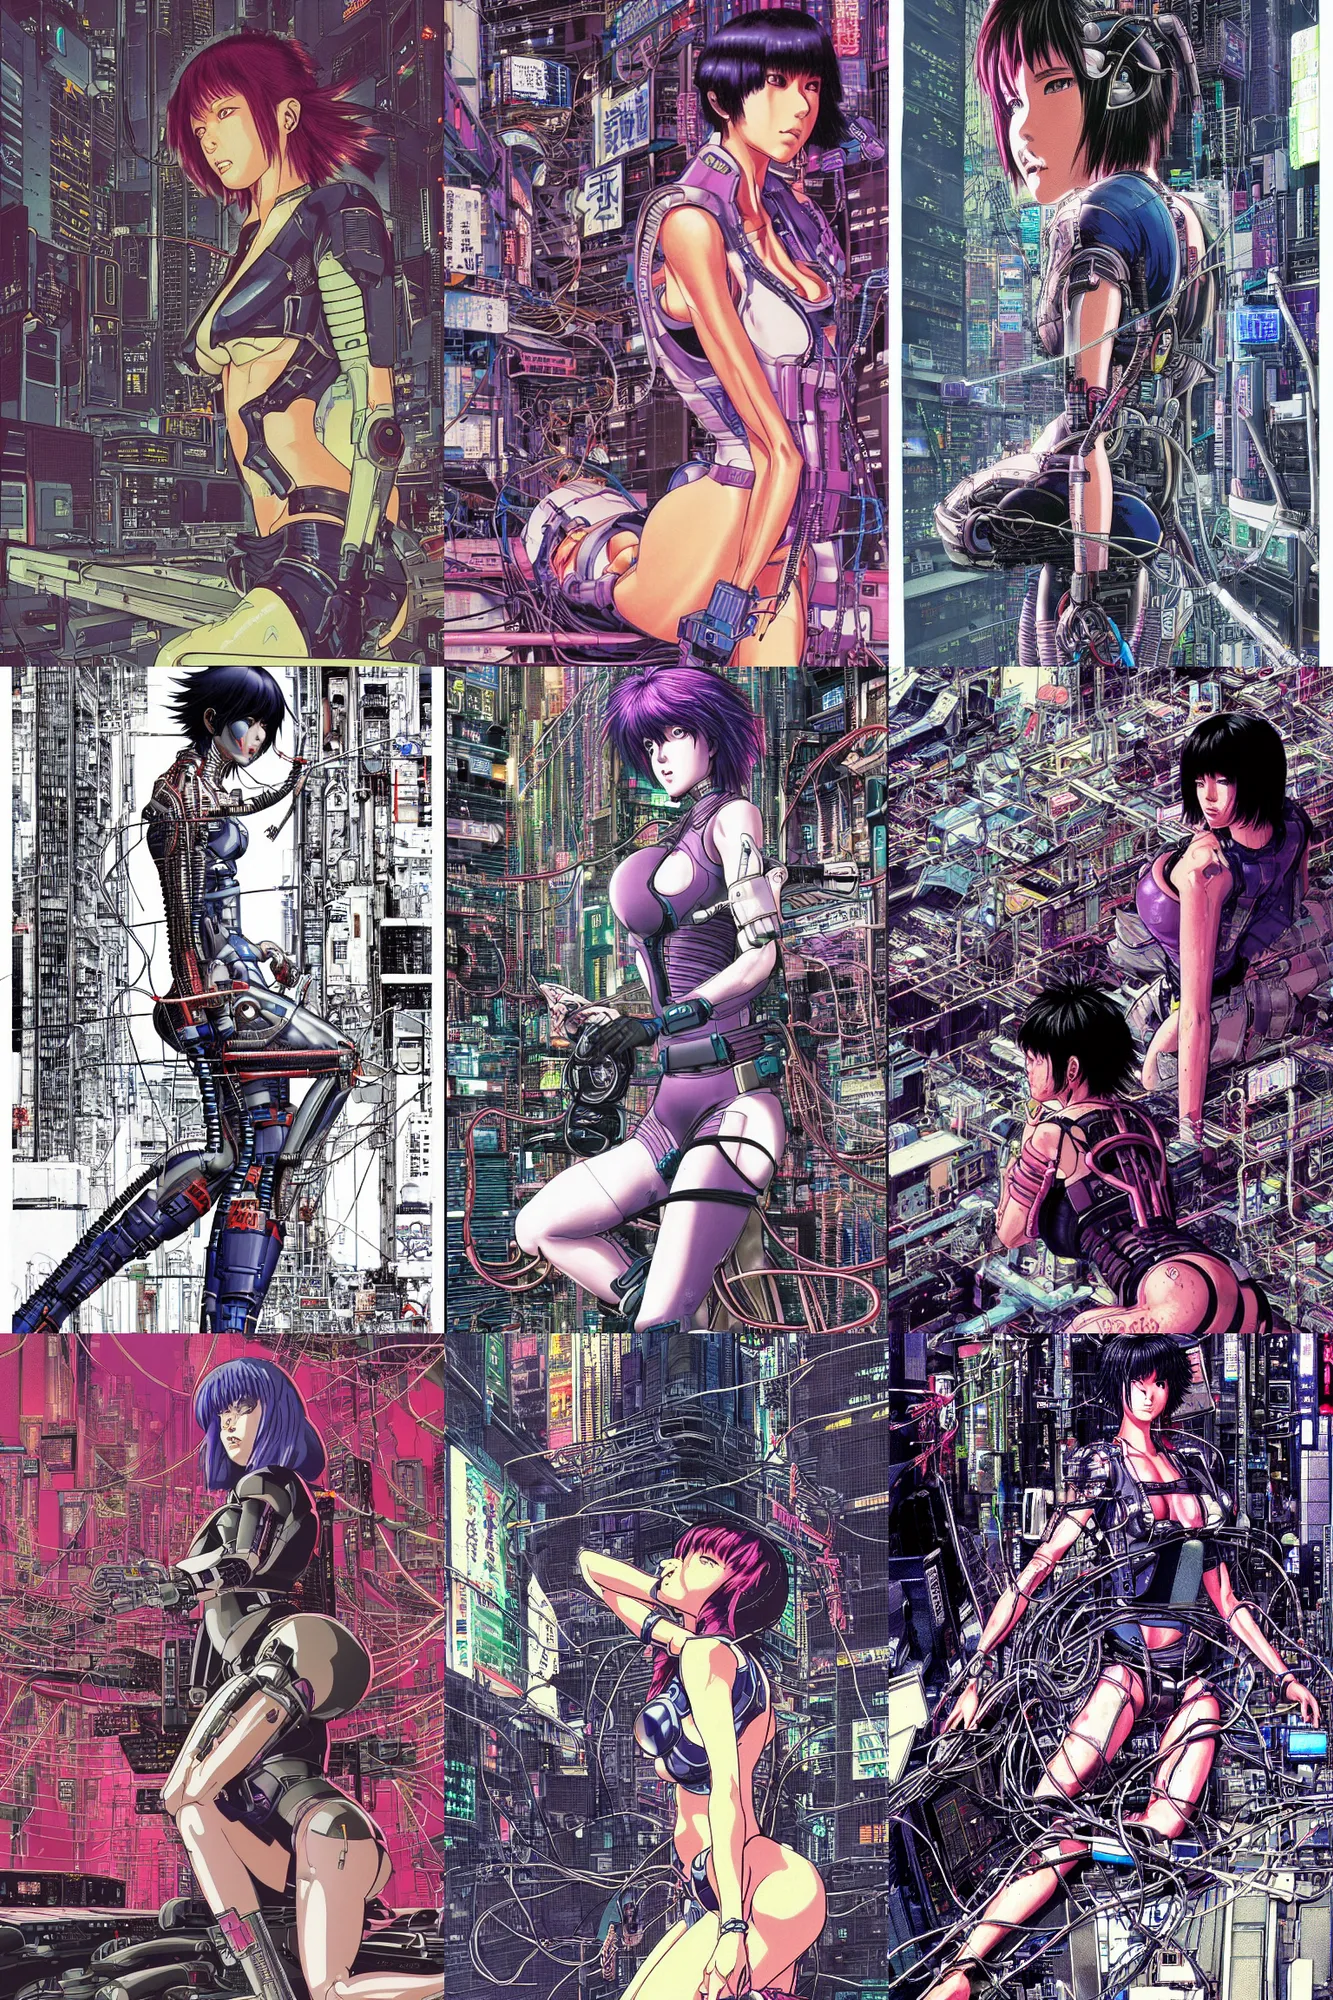 Prompt: an hyper-detailed cyberpunk illustration of motoko kusanagi kneeling on the floor in a tech labor, seen from the side with her body open showing cables and wires coming out, by masamune shirow, Yukito Kishiro and katsuhiro otomo, japan, 1980s, centered, colorful, ultra coherent